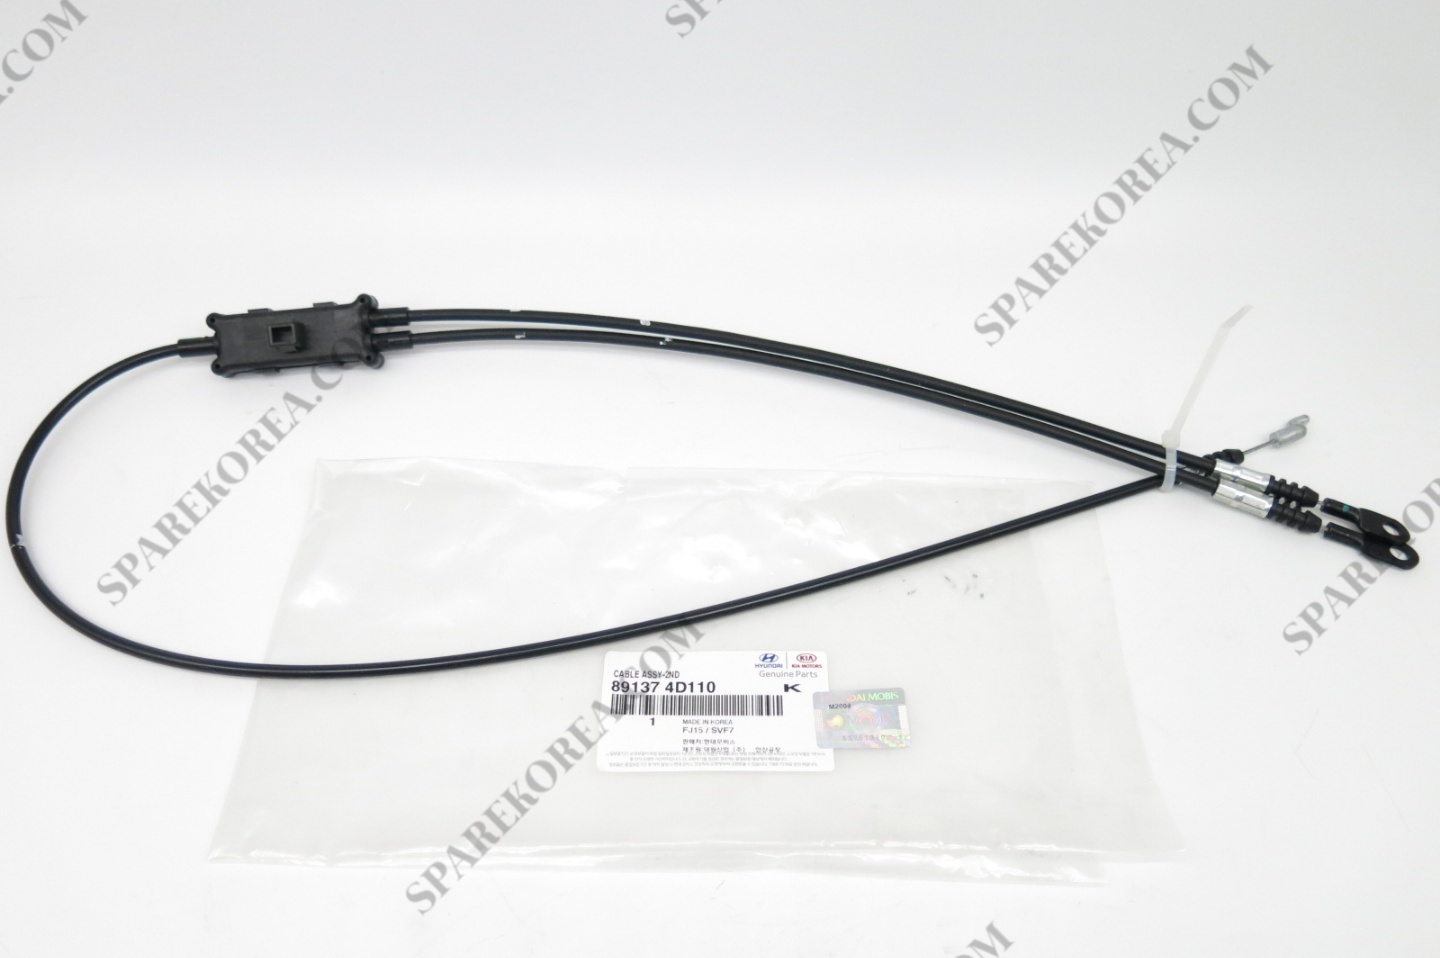 Genuine Hyundai 89137-4D110 Seat Cable Assembly 